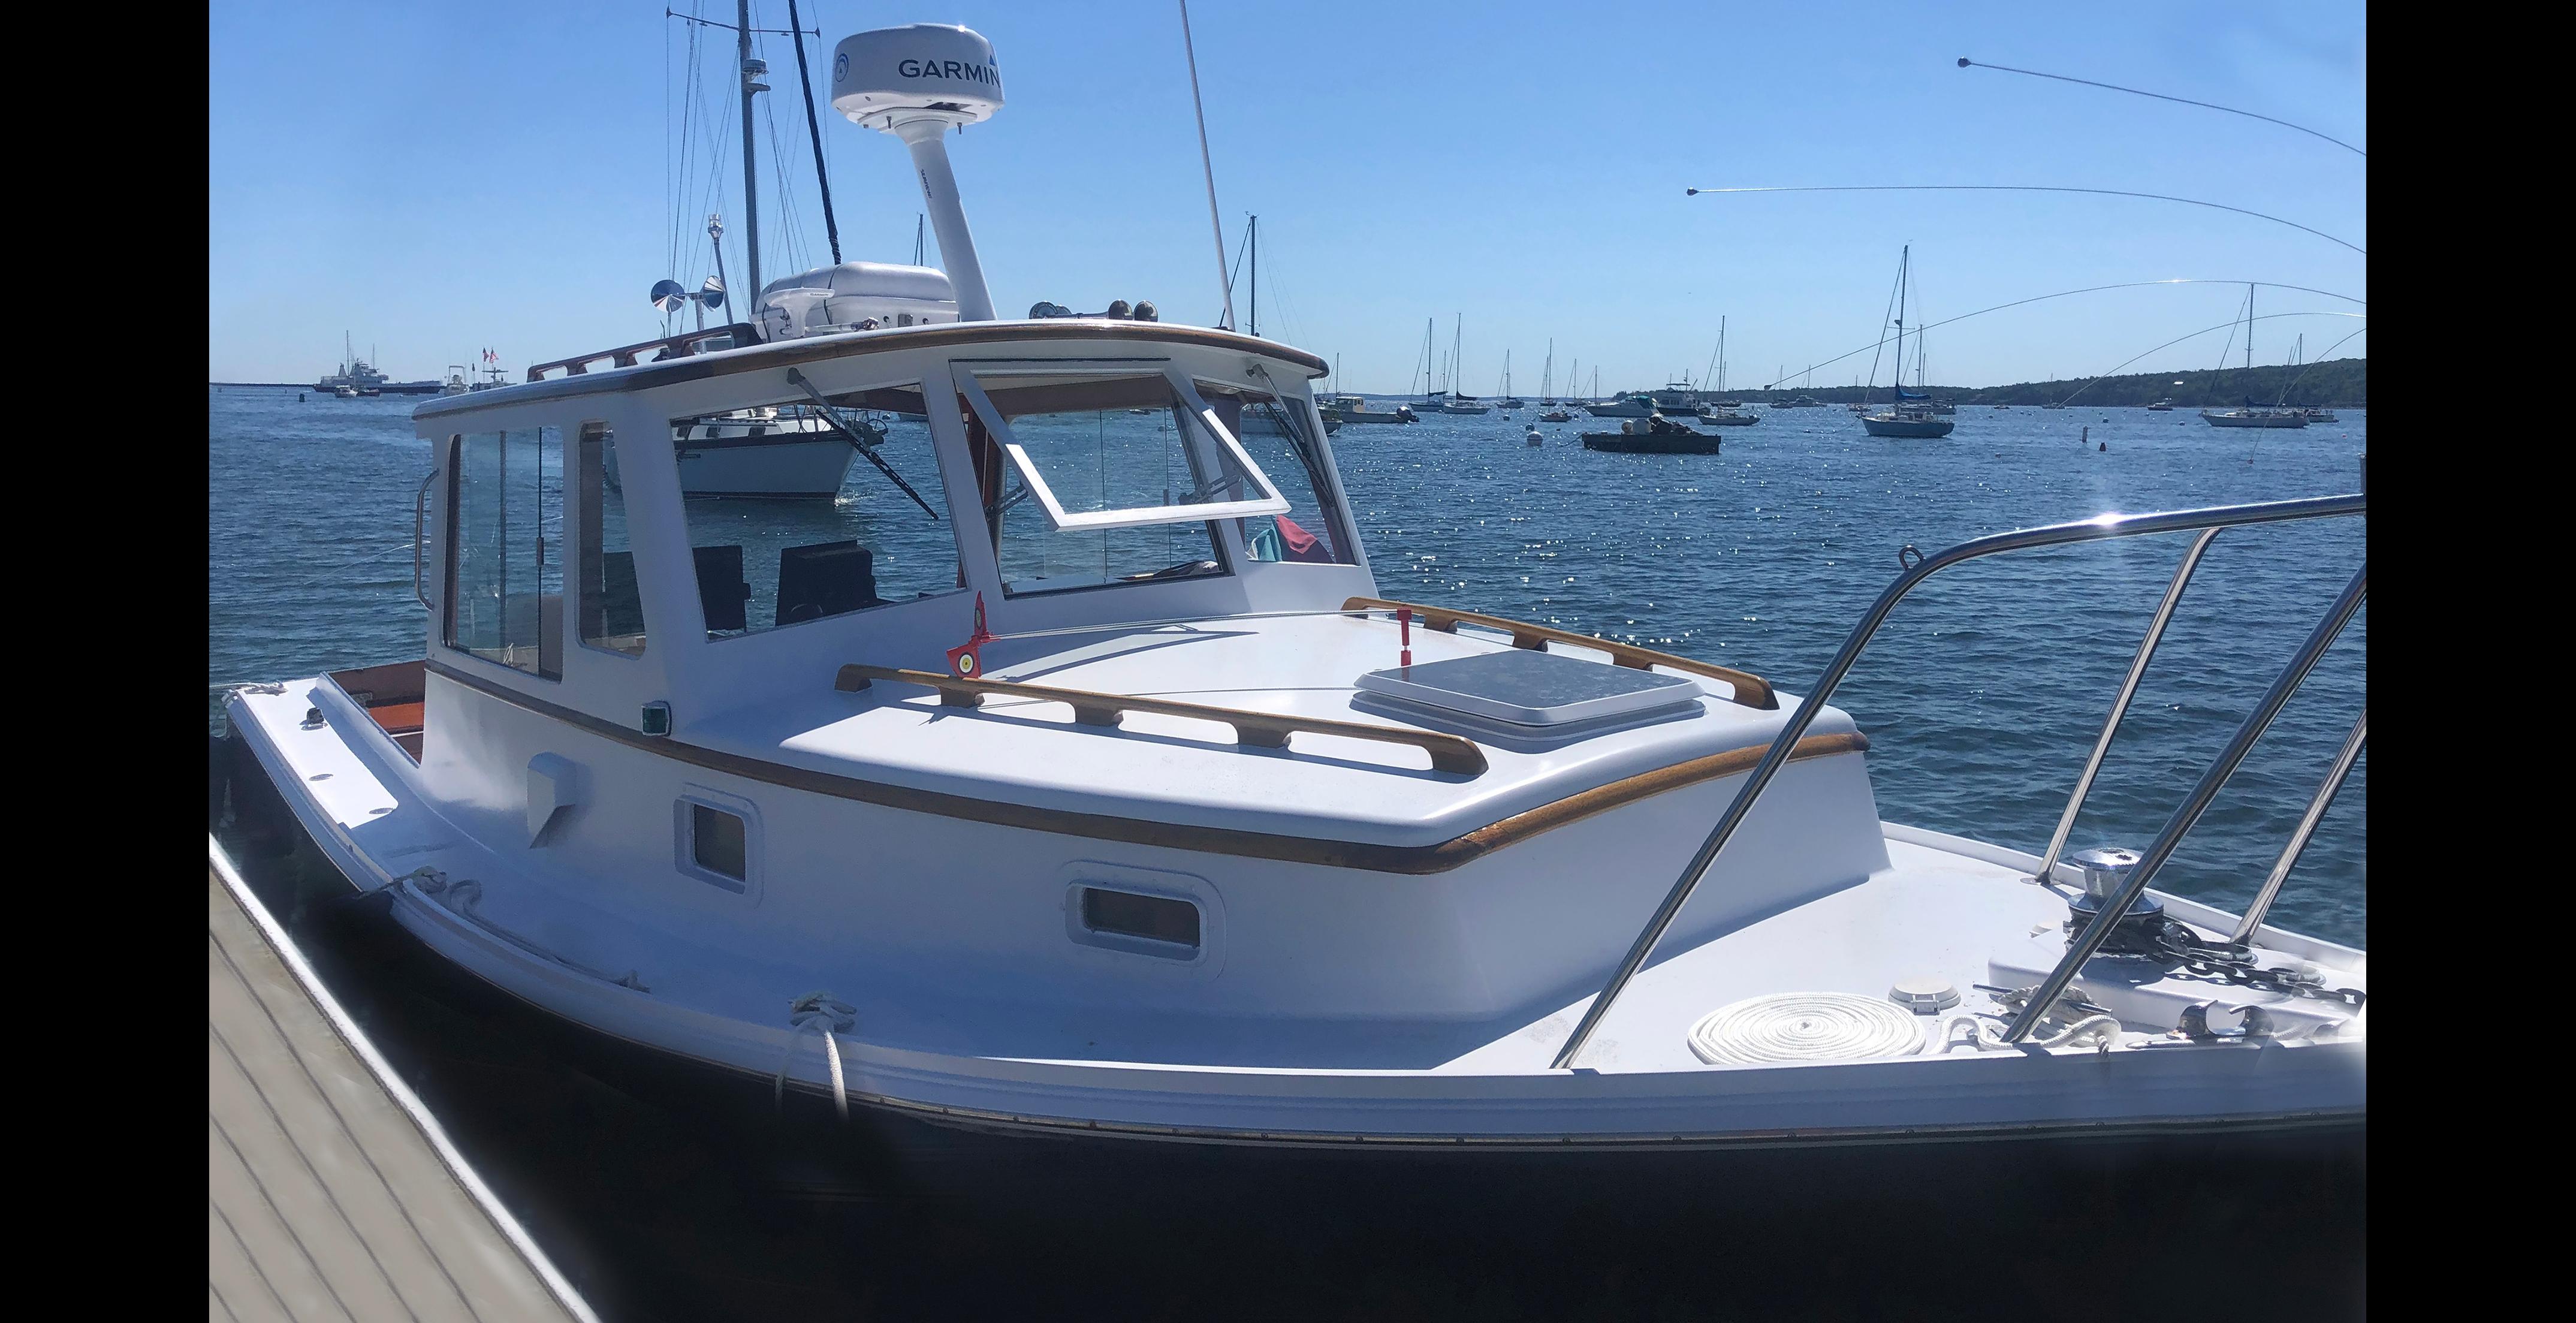 1993 John Williams Stanley 28 Downeast for sale - YachtWorld